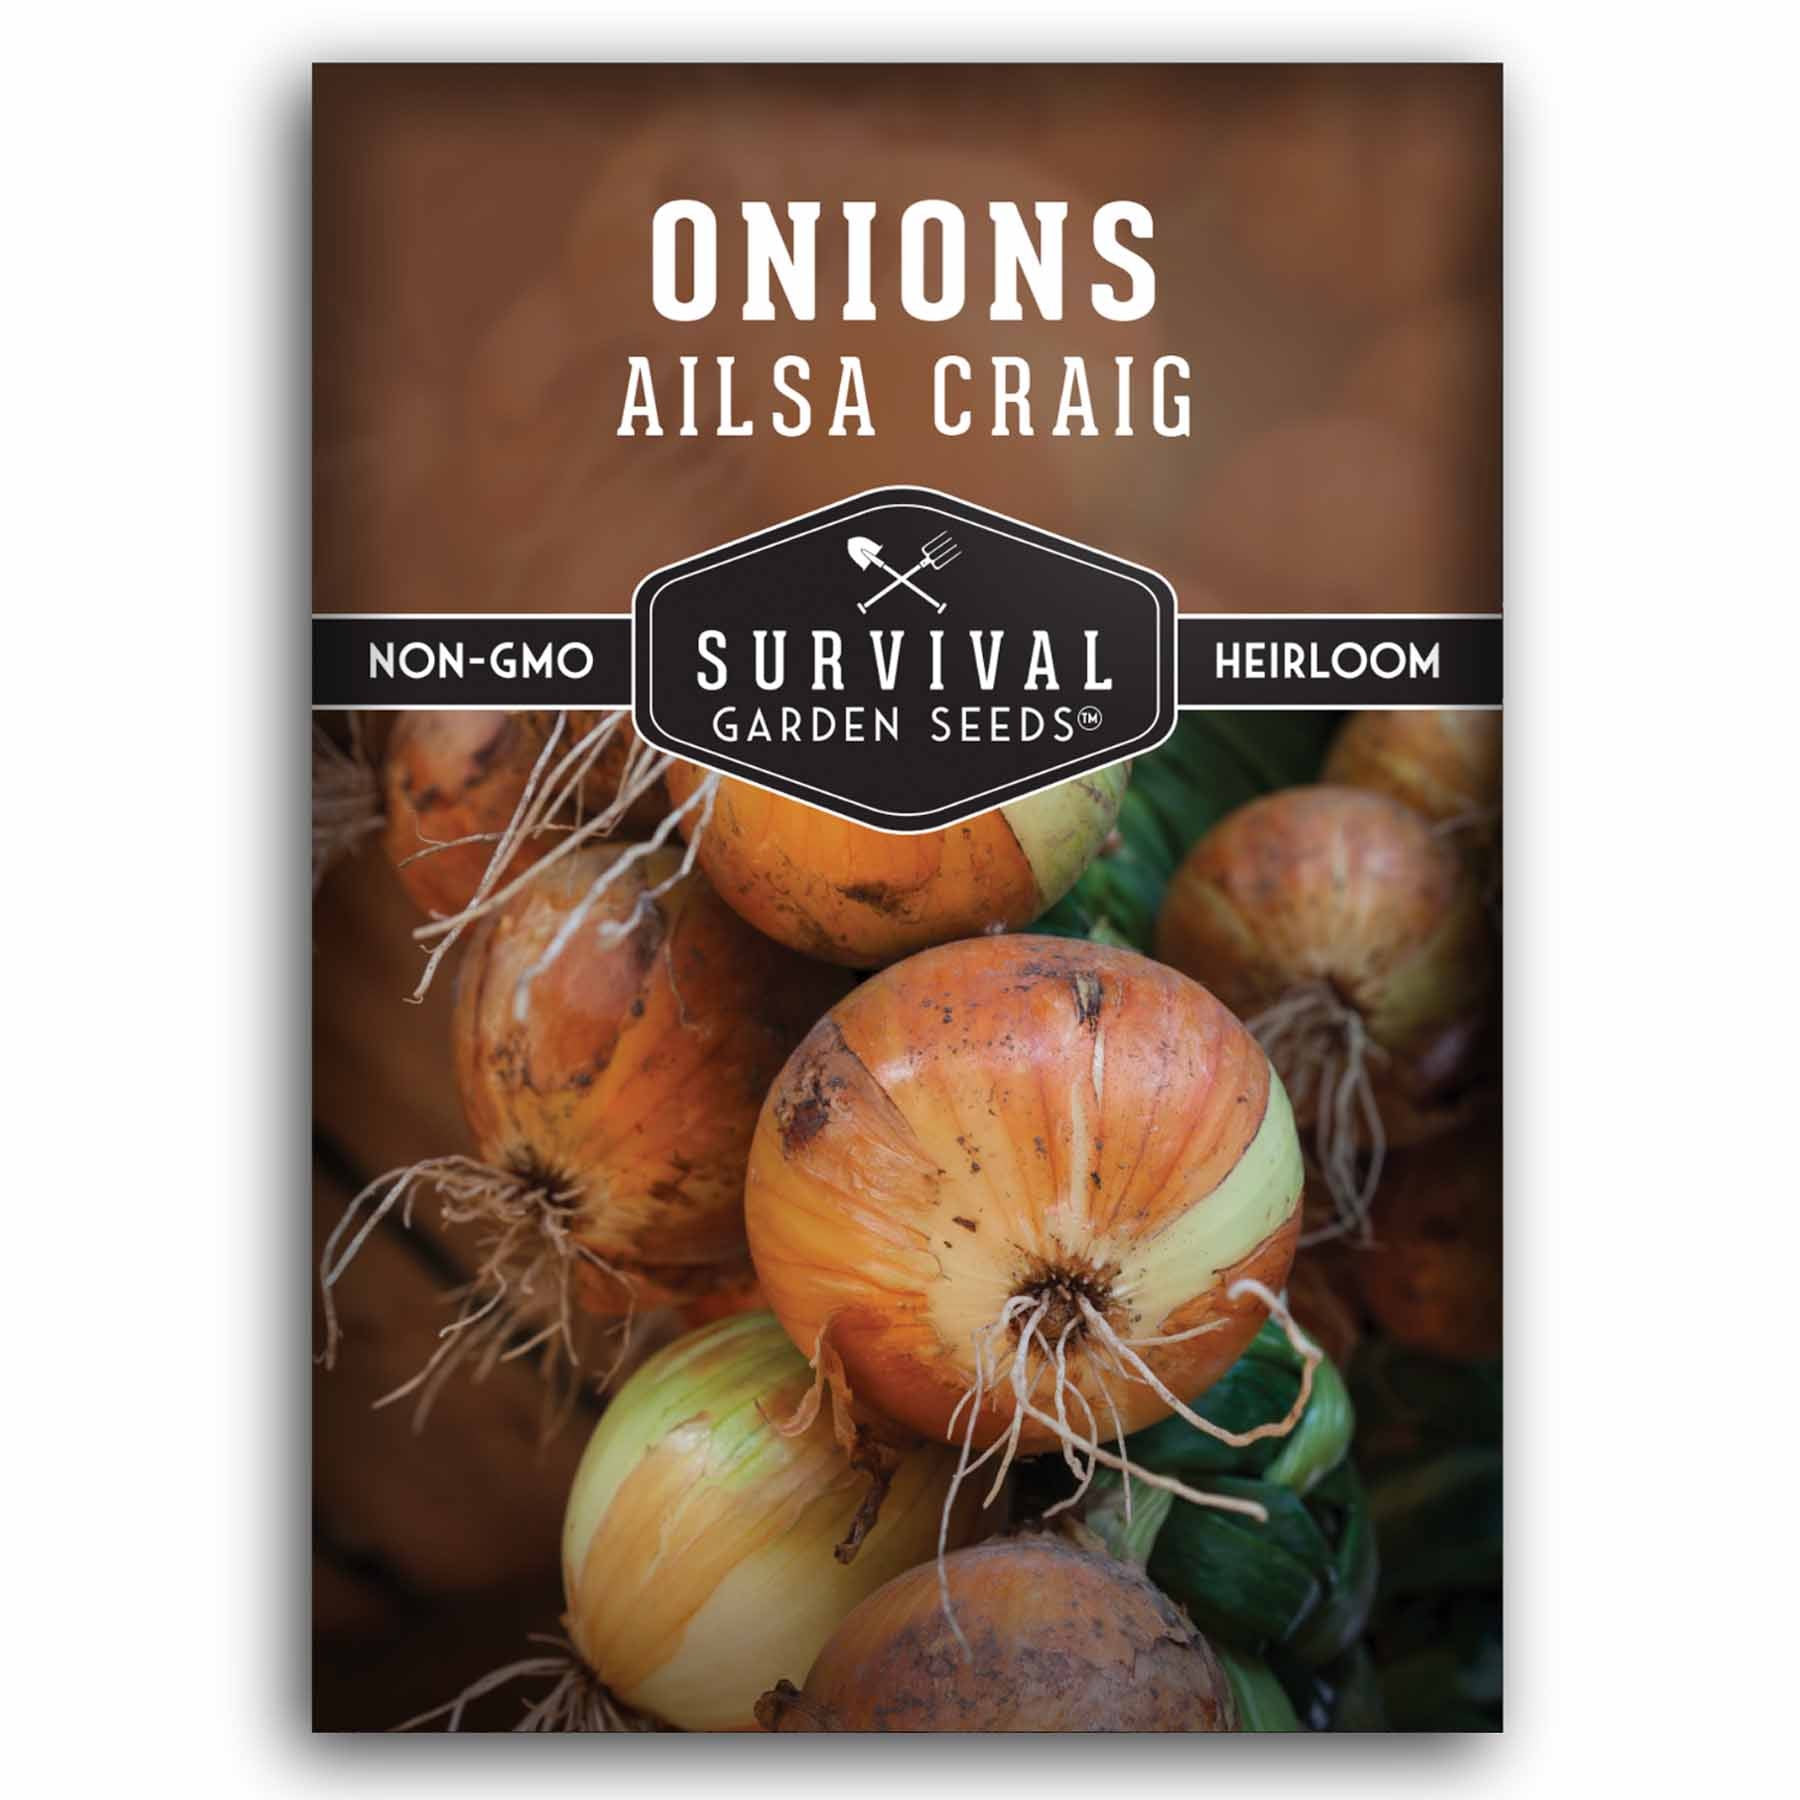 1 packet of Ailsa Craig Onion seeds